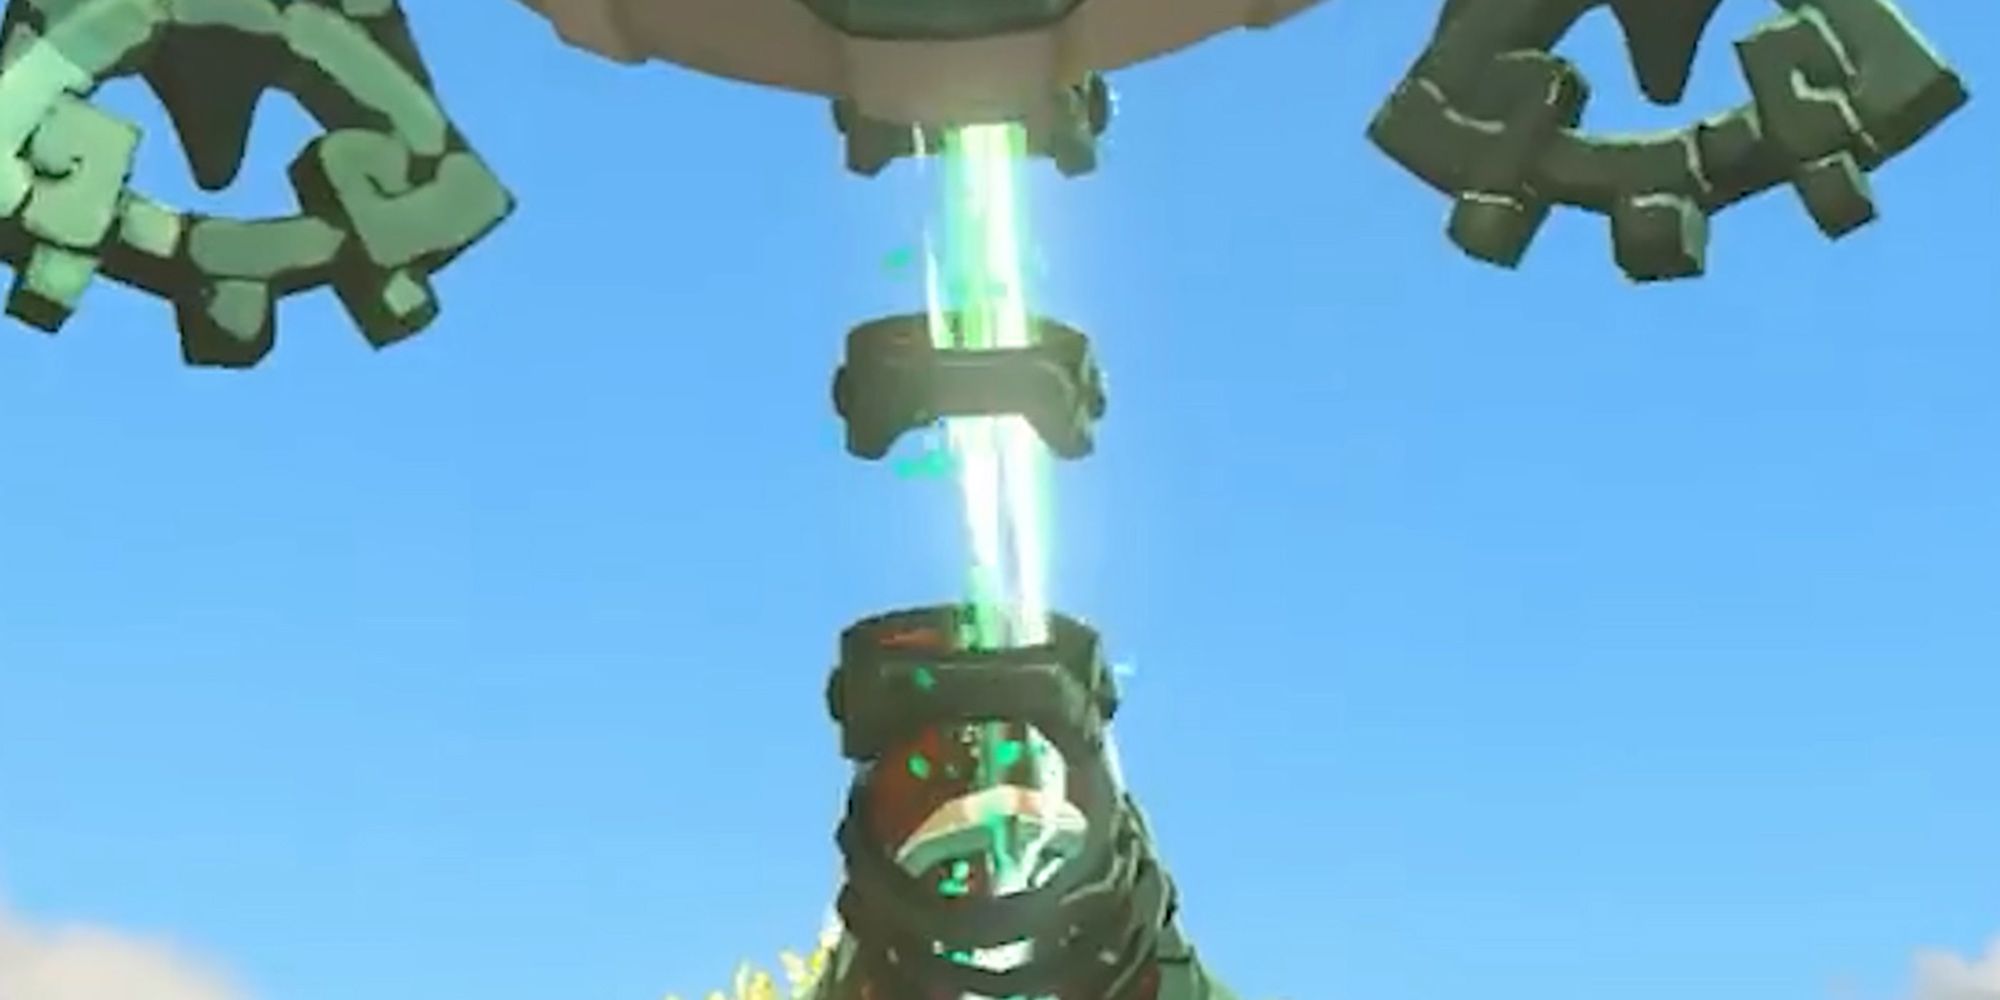 Legend-Of-Zelda-Breath-Of-The-Wild-2-Second-Trailer---The-Spinal-Column-Of-The-Golem-Link-Fights-And-How-It-Looks-Similar-To-The-Energy-Sealing-Ganondorf-1